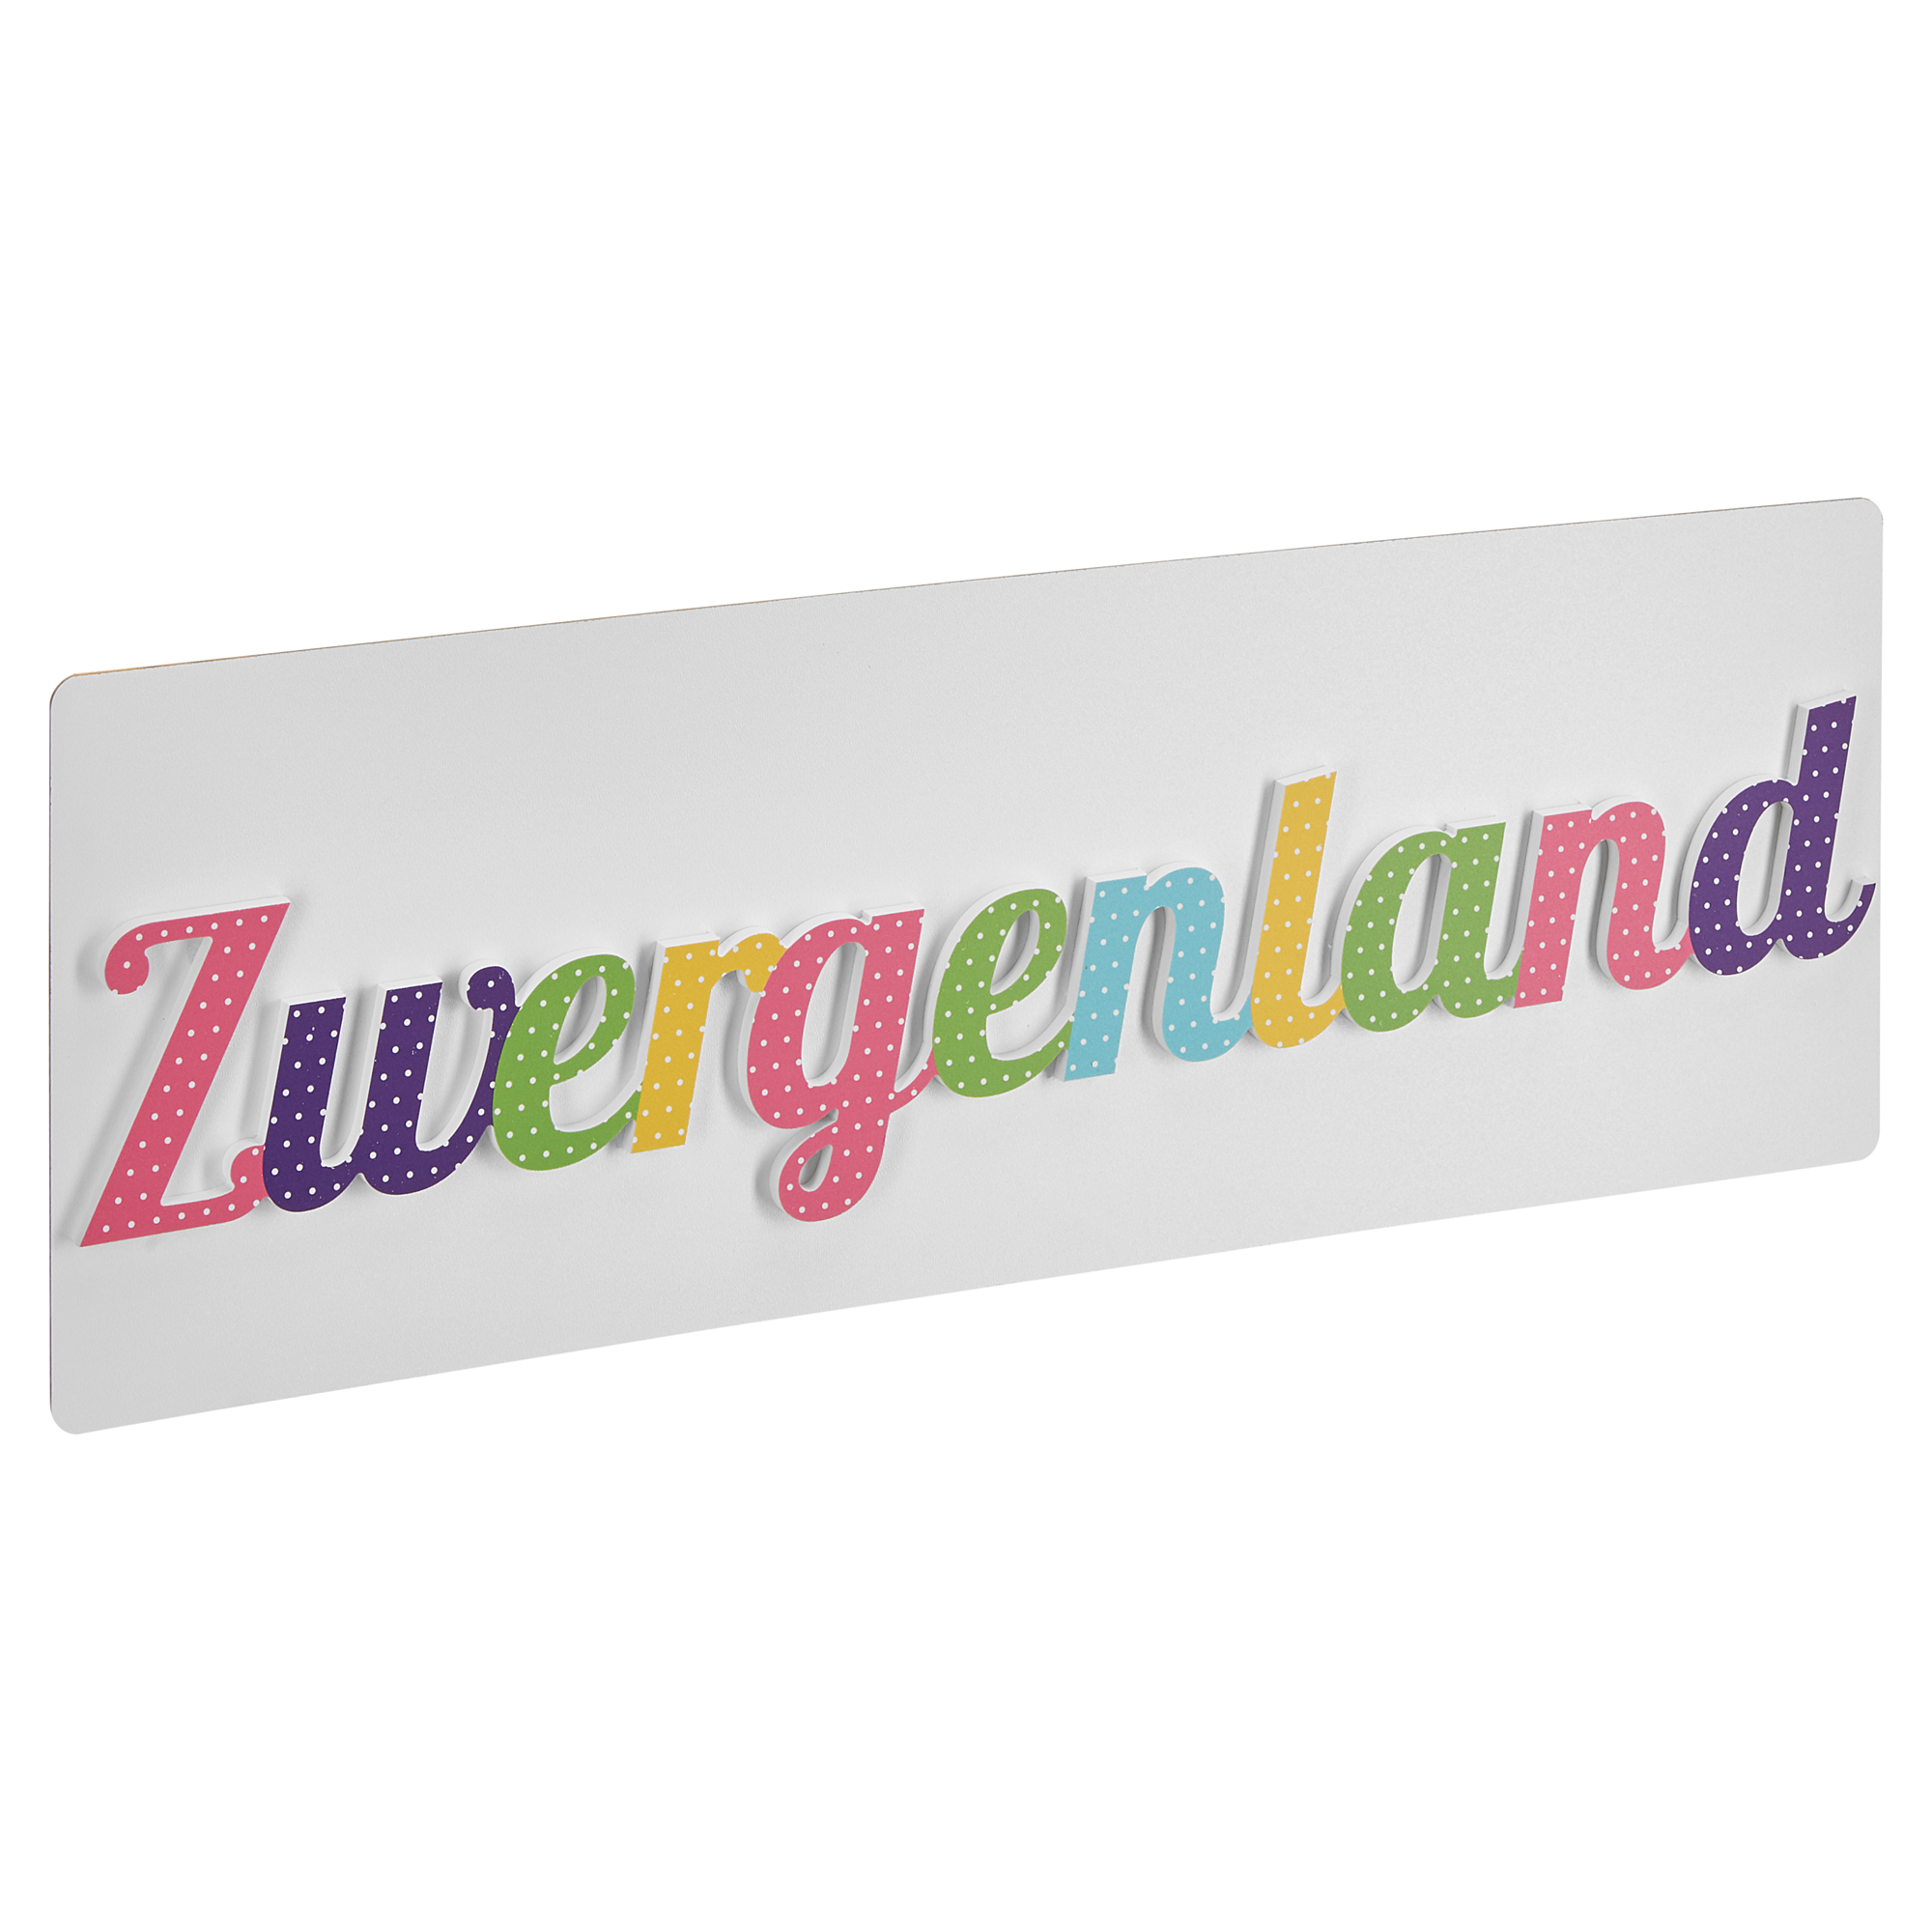 Decopanel "Zwergenland" Cut-Out 70 x 25 cm + product picture